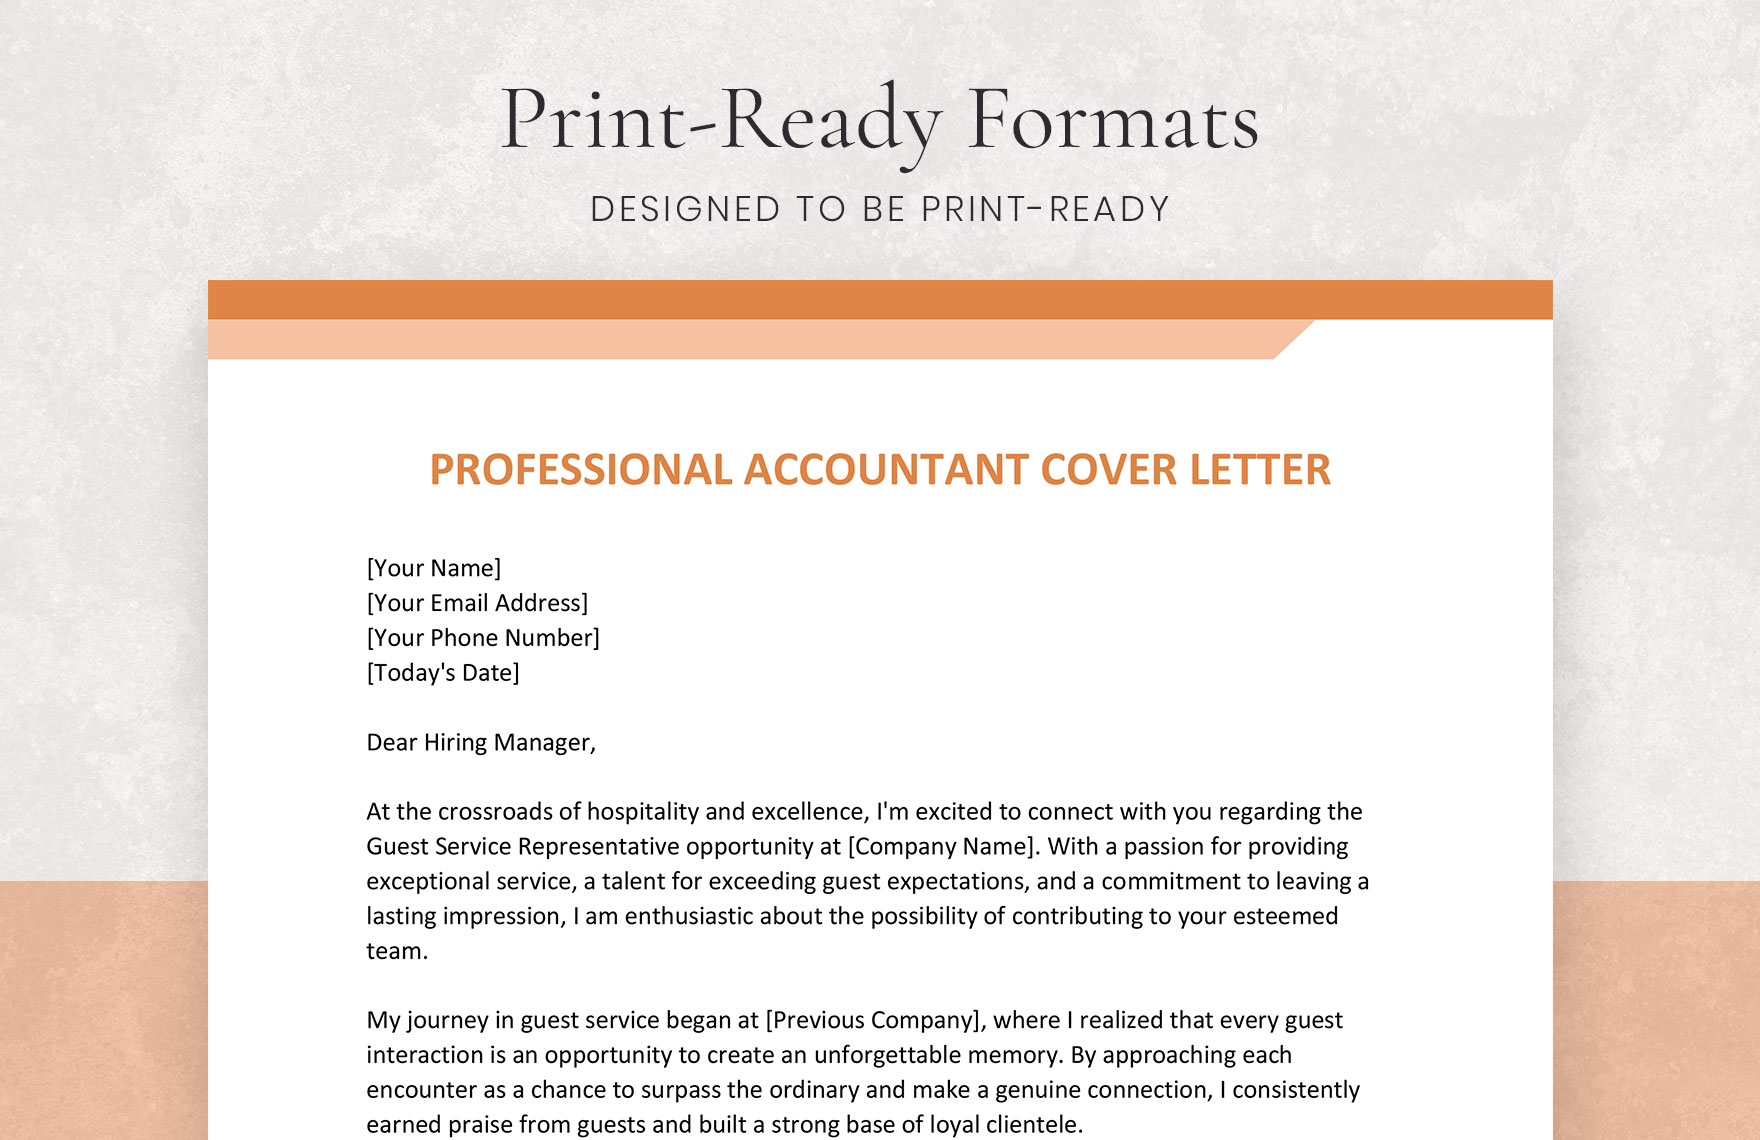 Professional Accountant Cover Letter